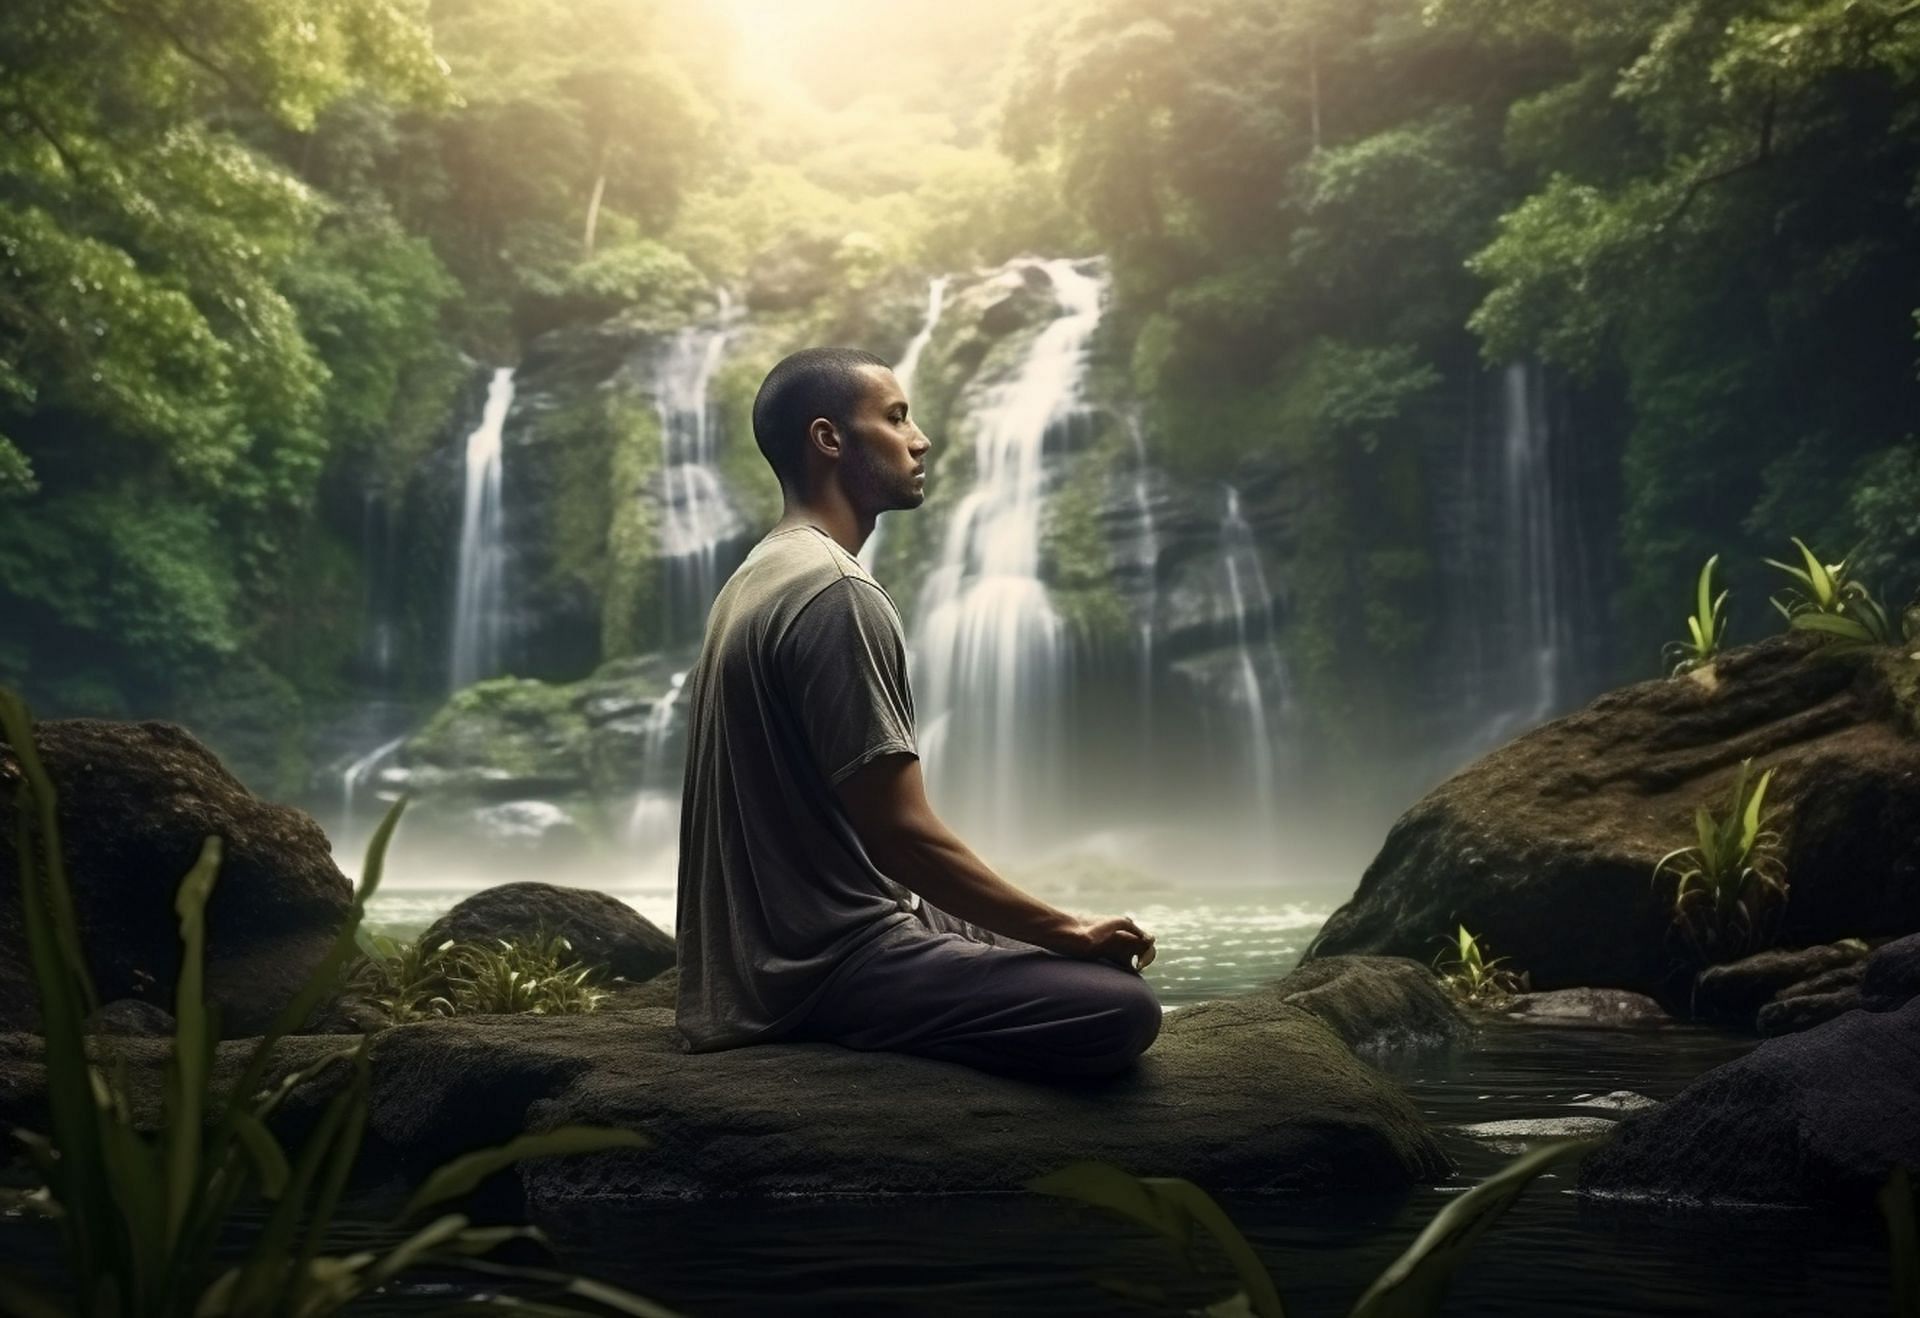 Can try some guided meditation (Image via Veectezy)